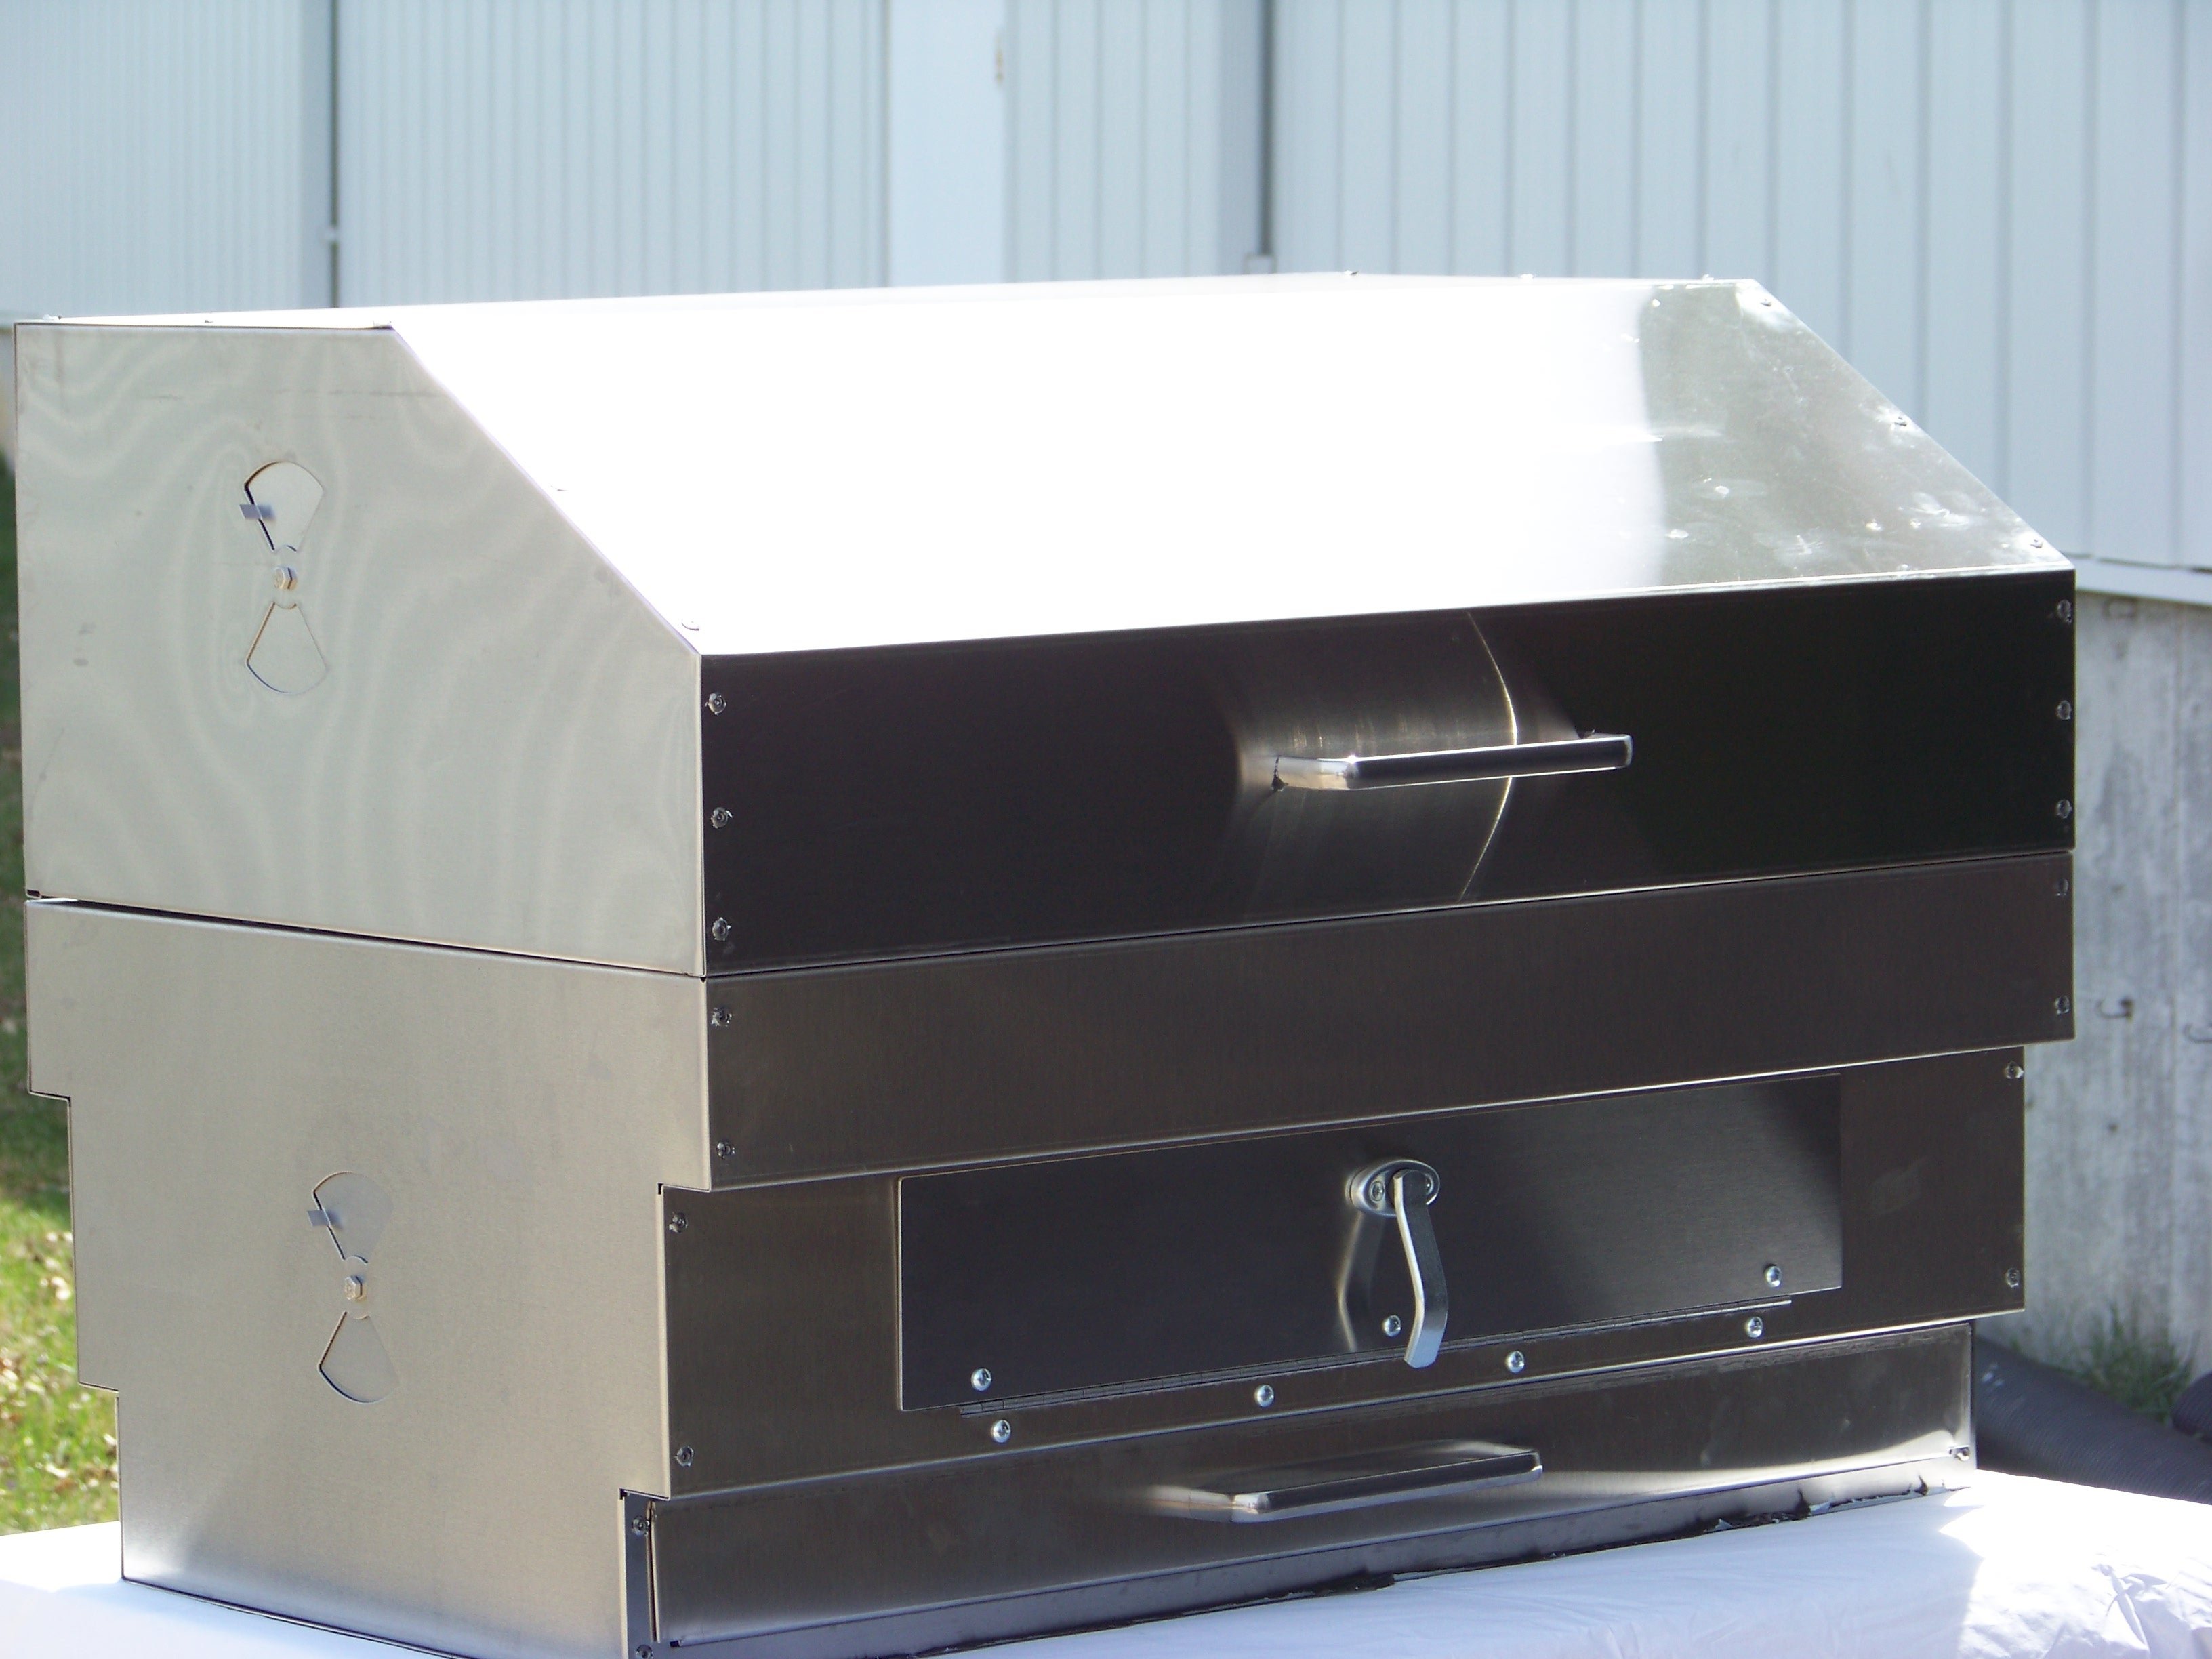 Stainless Steel Smoker Grill